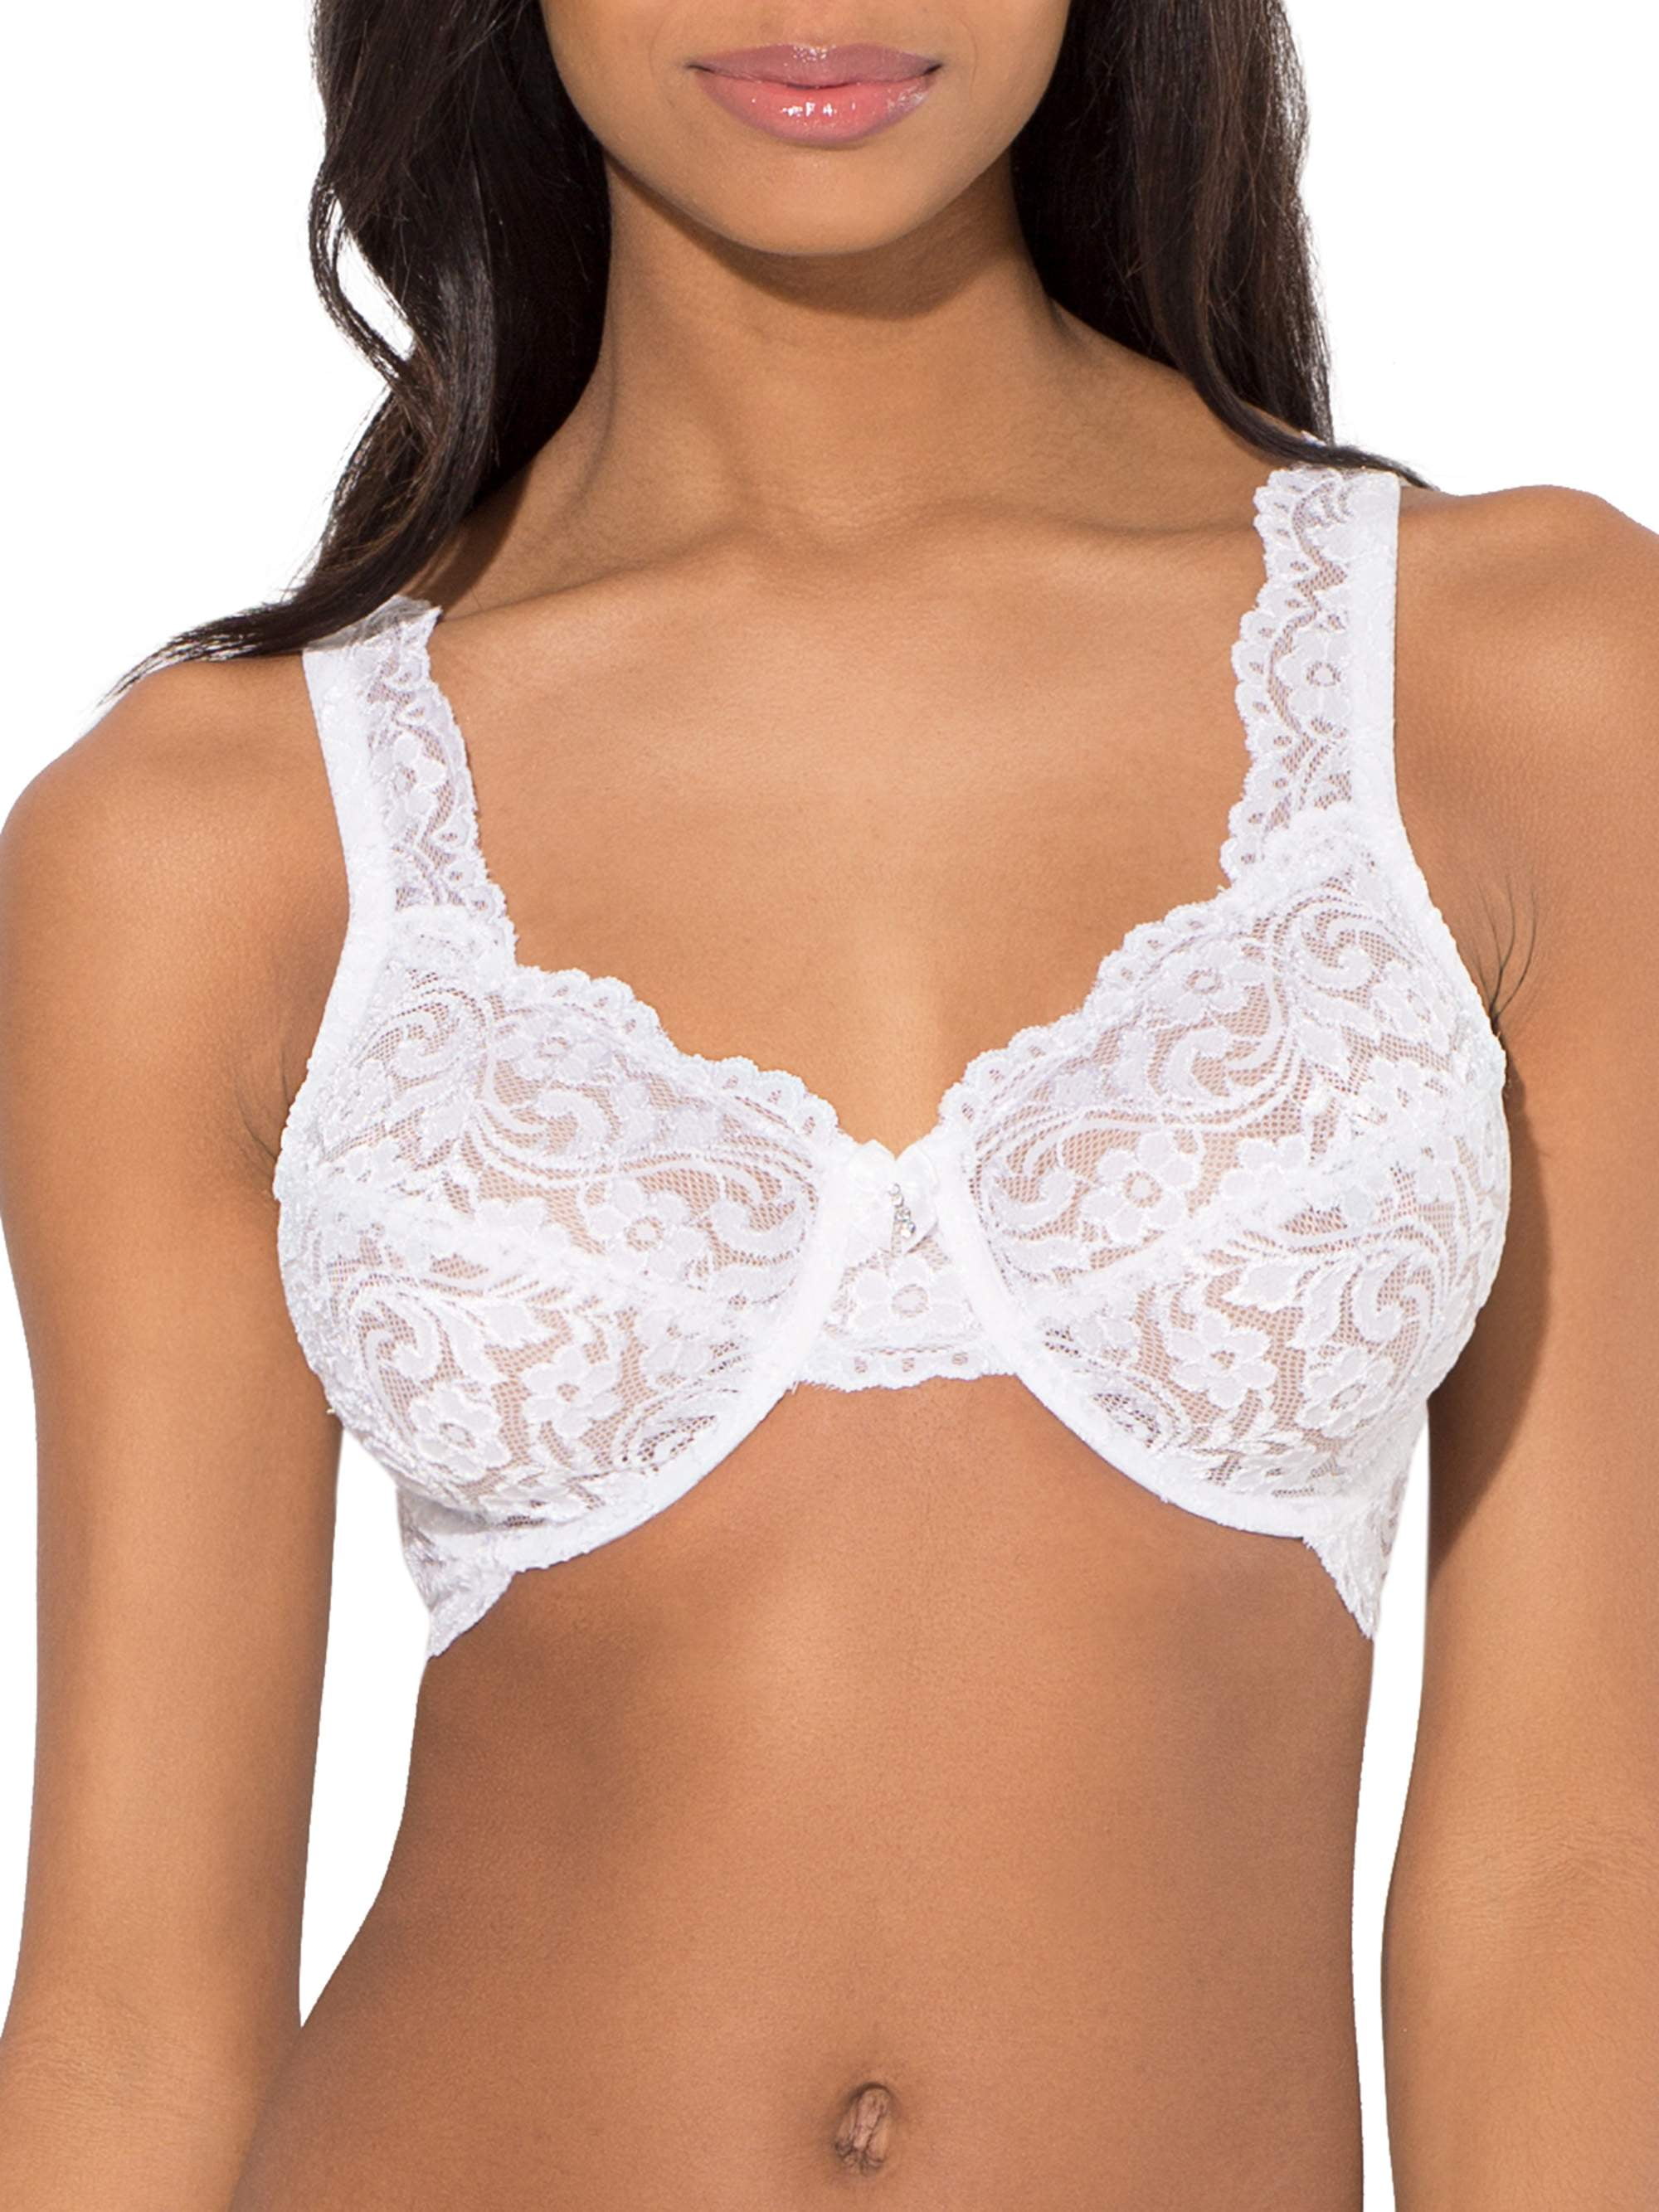 Details about   Youmita Padded Underwire Adjustable Strap Lace  36B  Bra 122717 